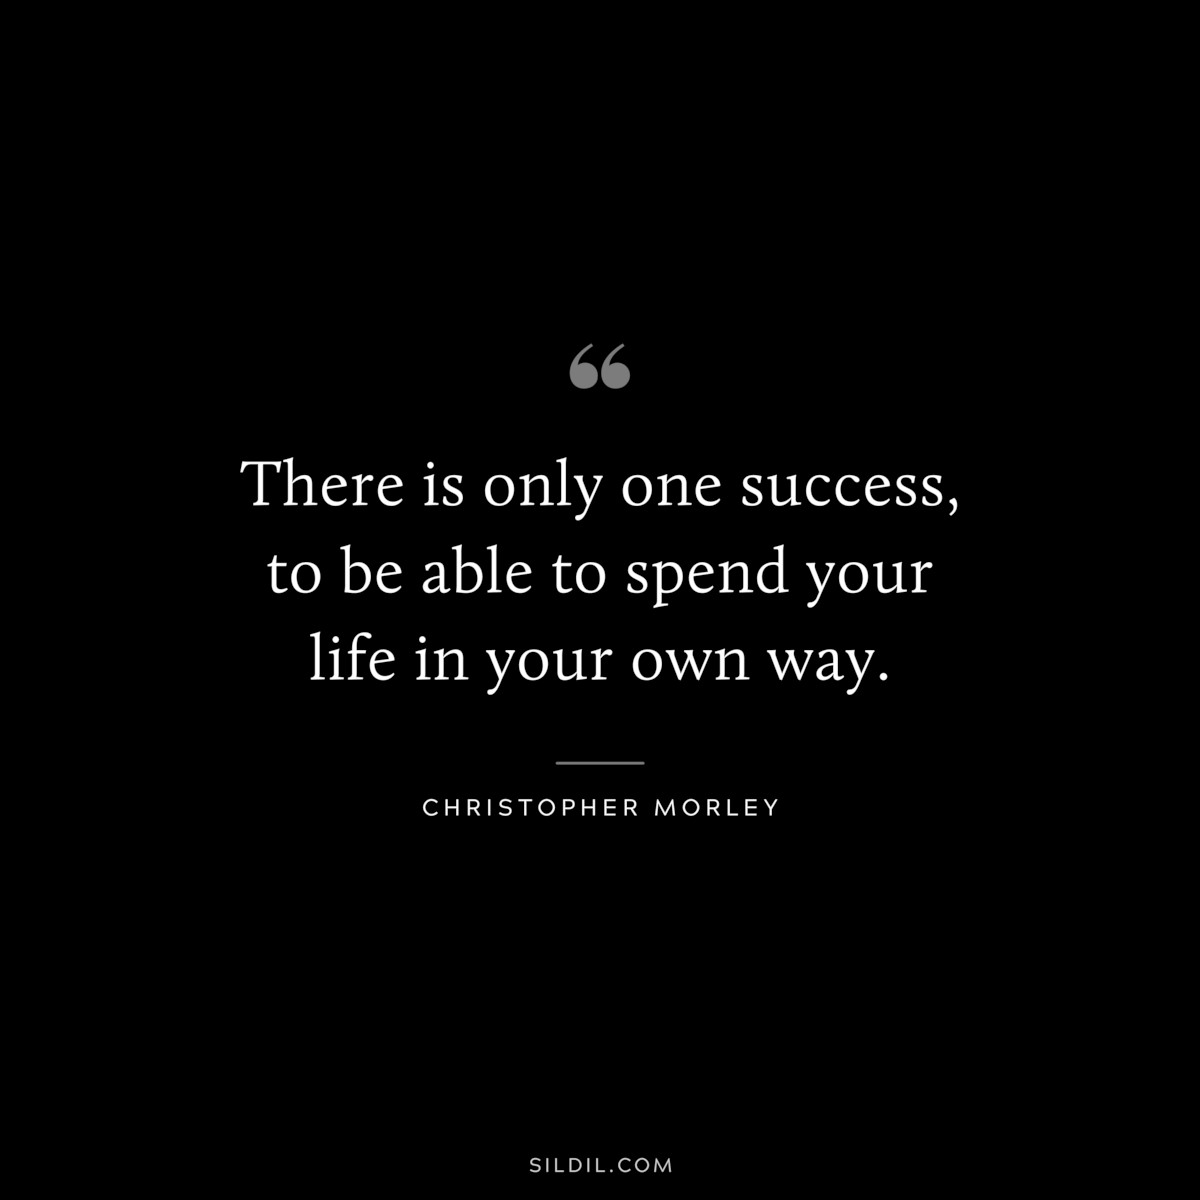 There is only one success, to be able to spend your life in your own way. ― Christopher Morley